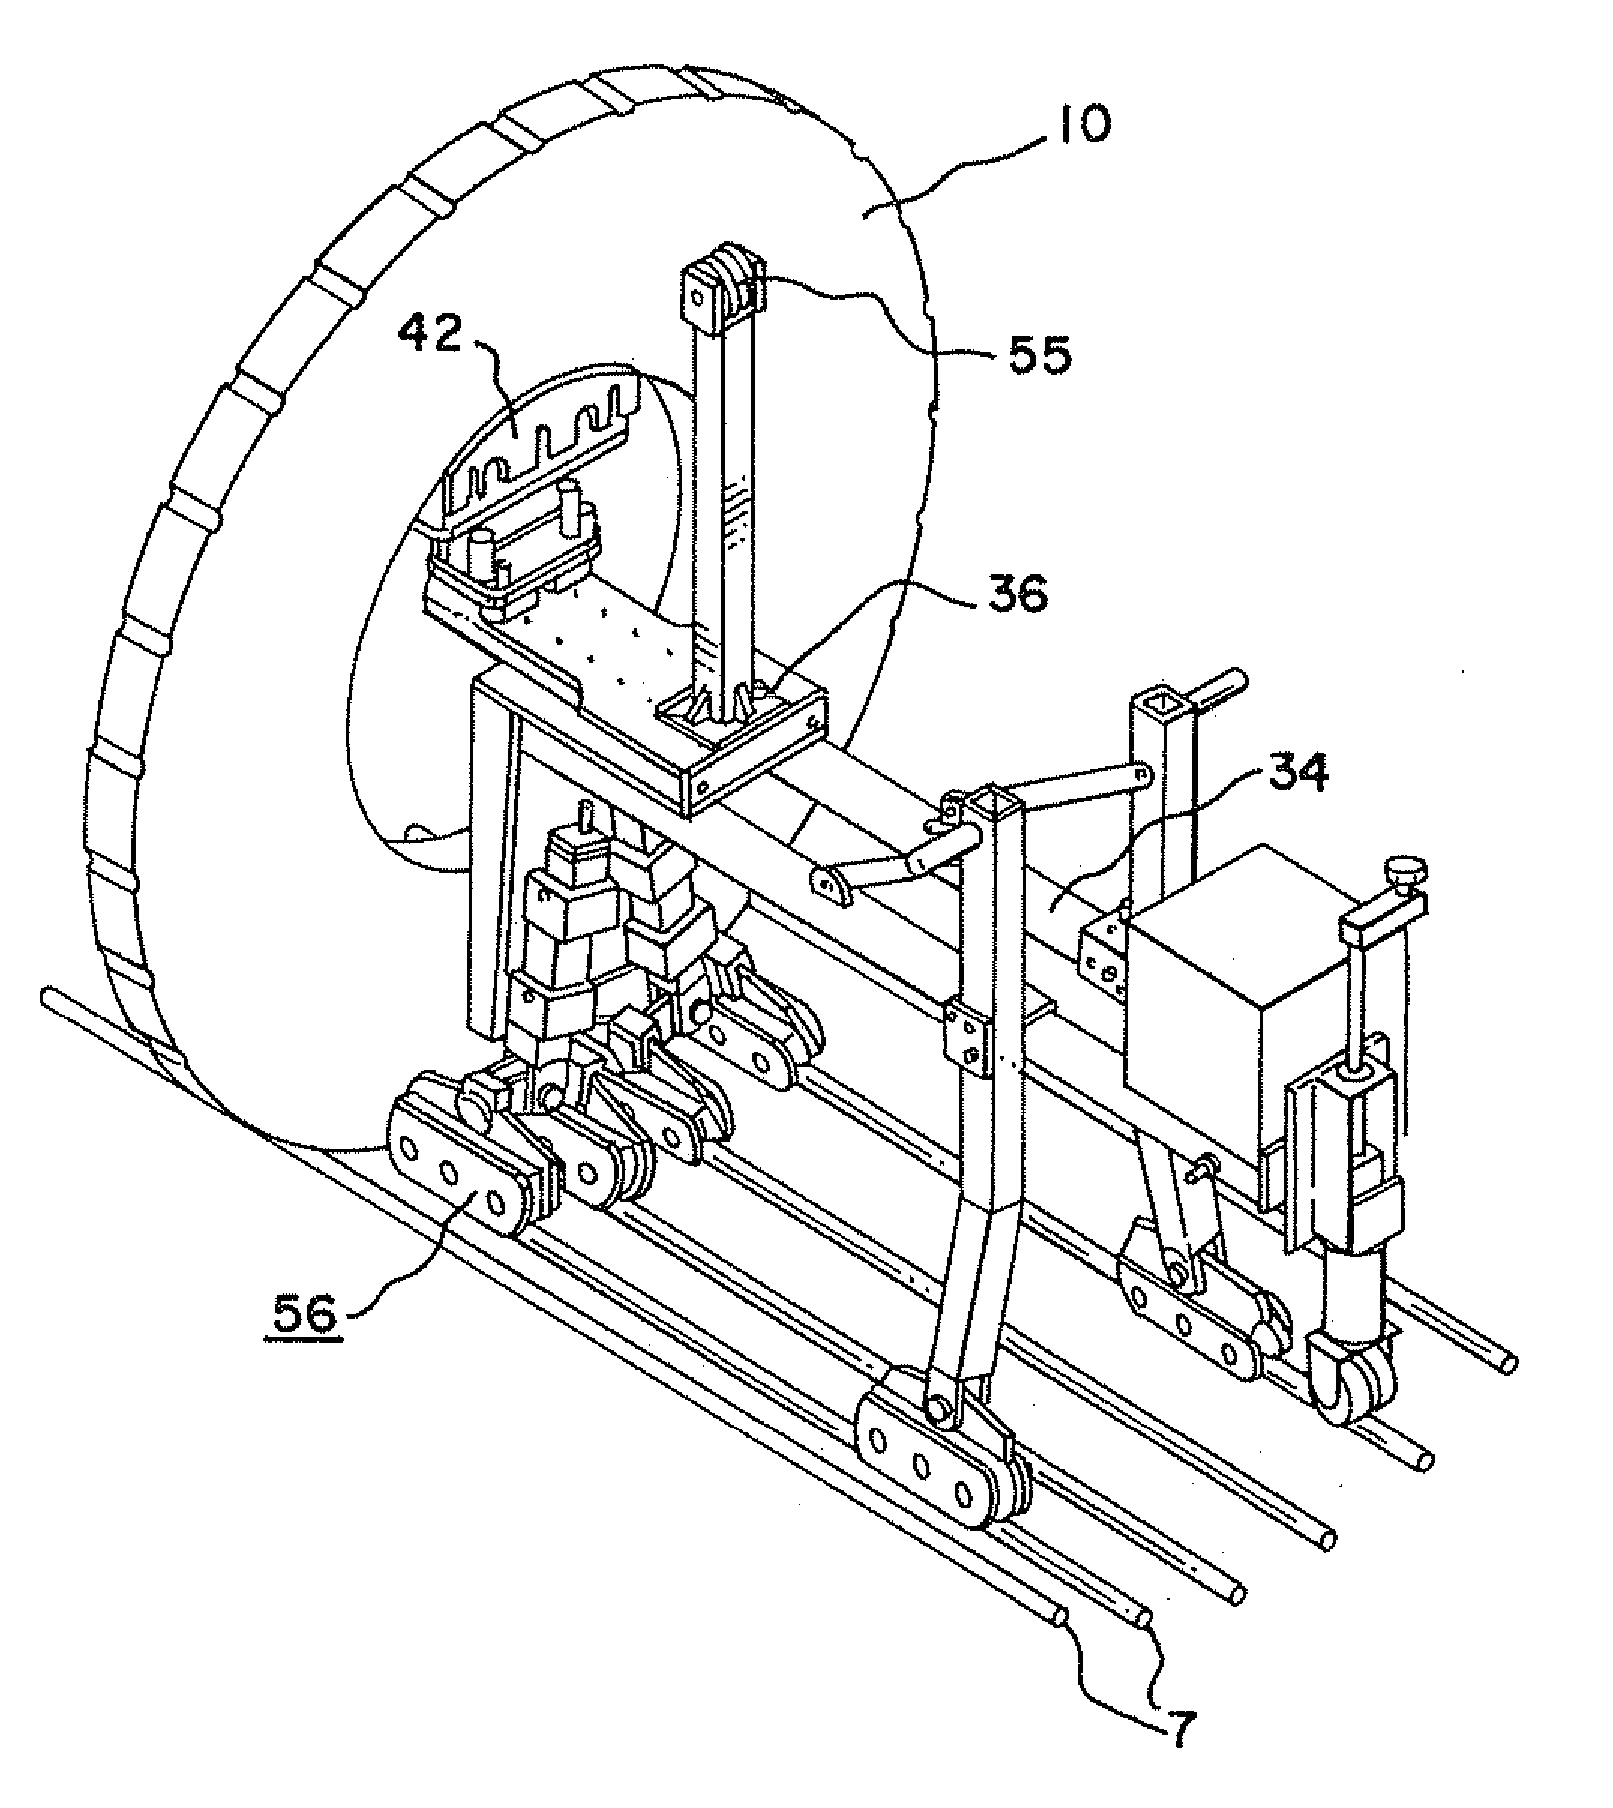 Horizontal Assembly of Stator Core Using Keybar Extensions